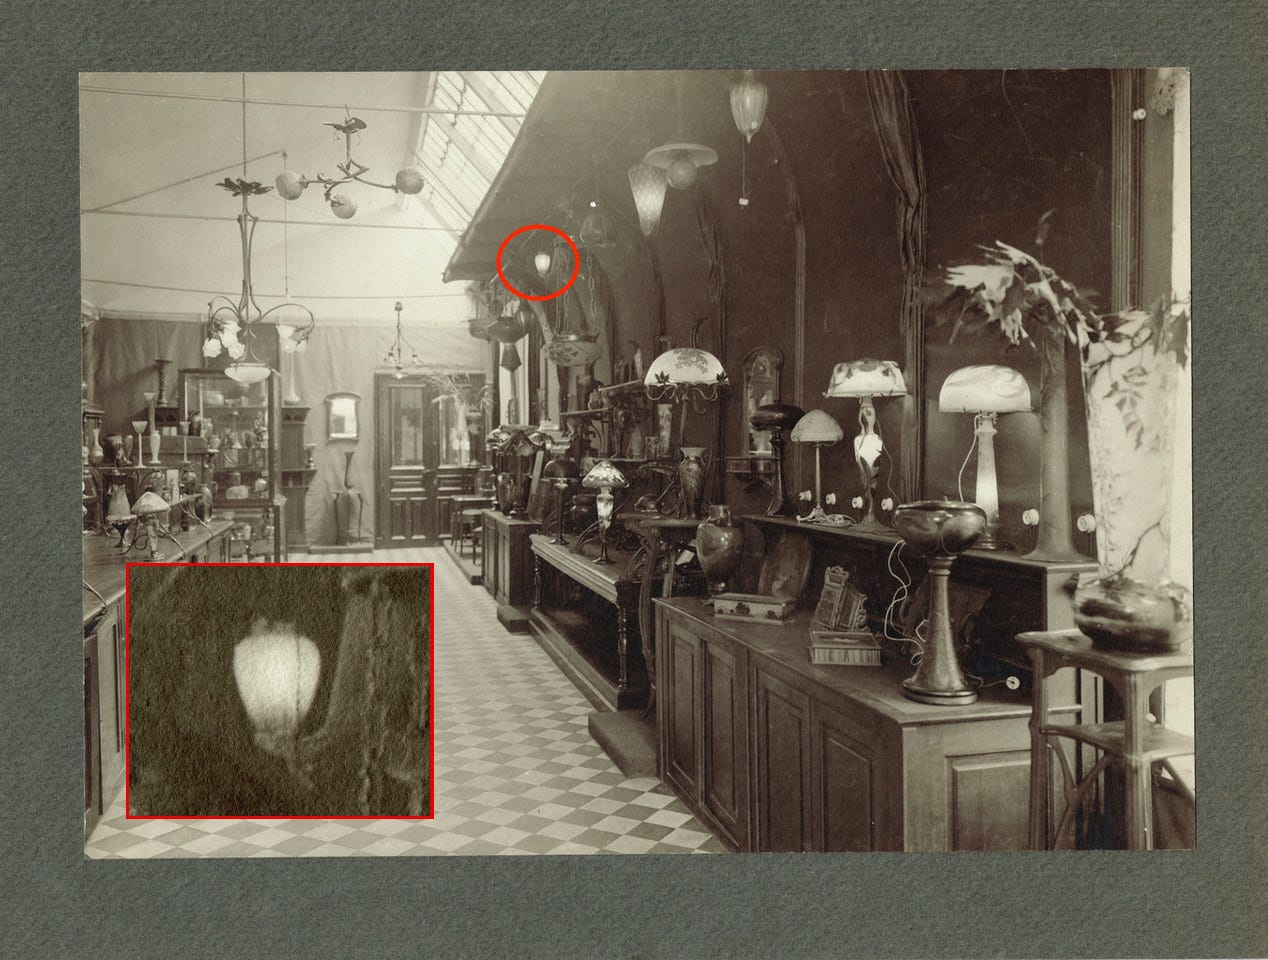 Hippolyte Dubois (attributed to), The Établissements Gallé's showroom ca. 1905, with the possible Cylène lamp circled in red (private collection).